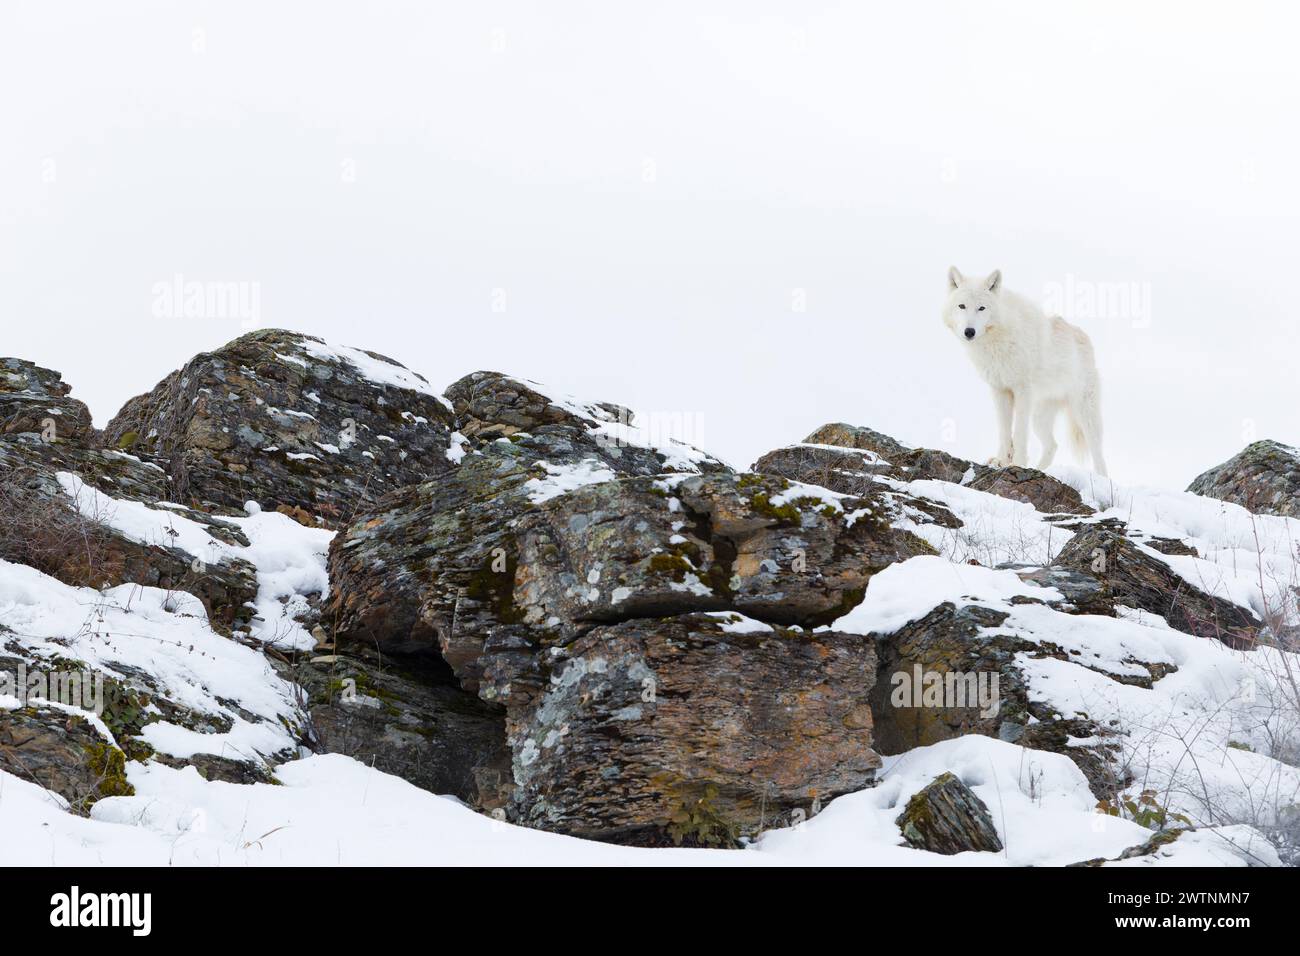 Arctic wolf Canis lupus arctos, adult standing on snow covered rocks, controlled conditions Stock Photo